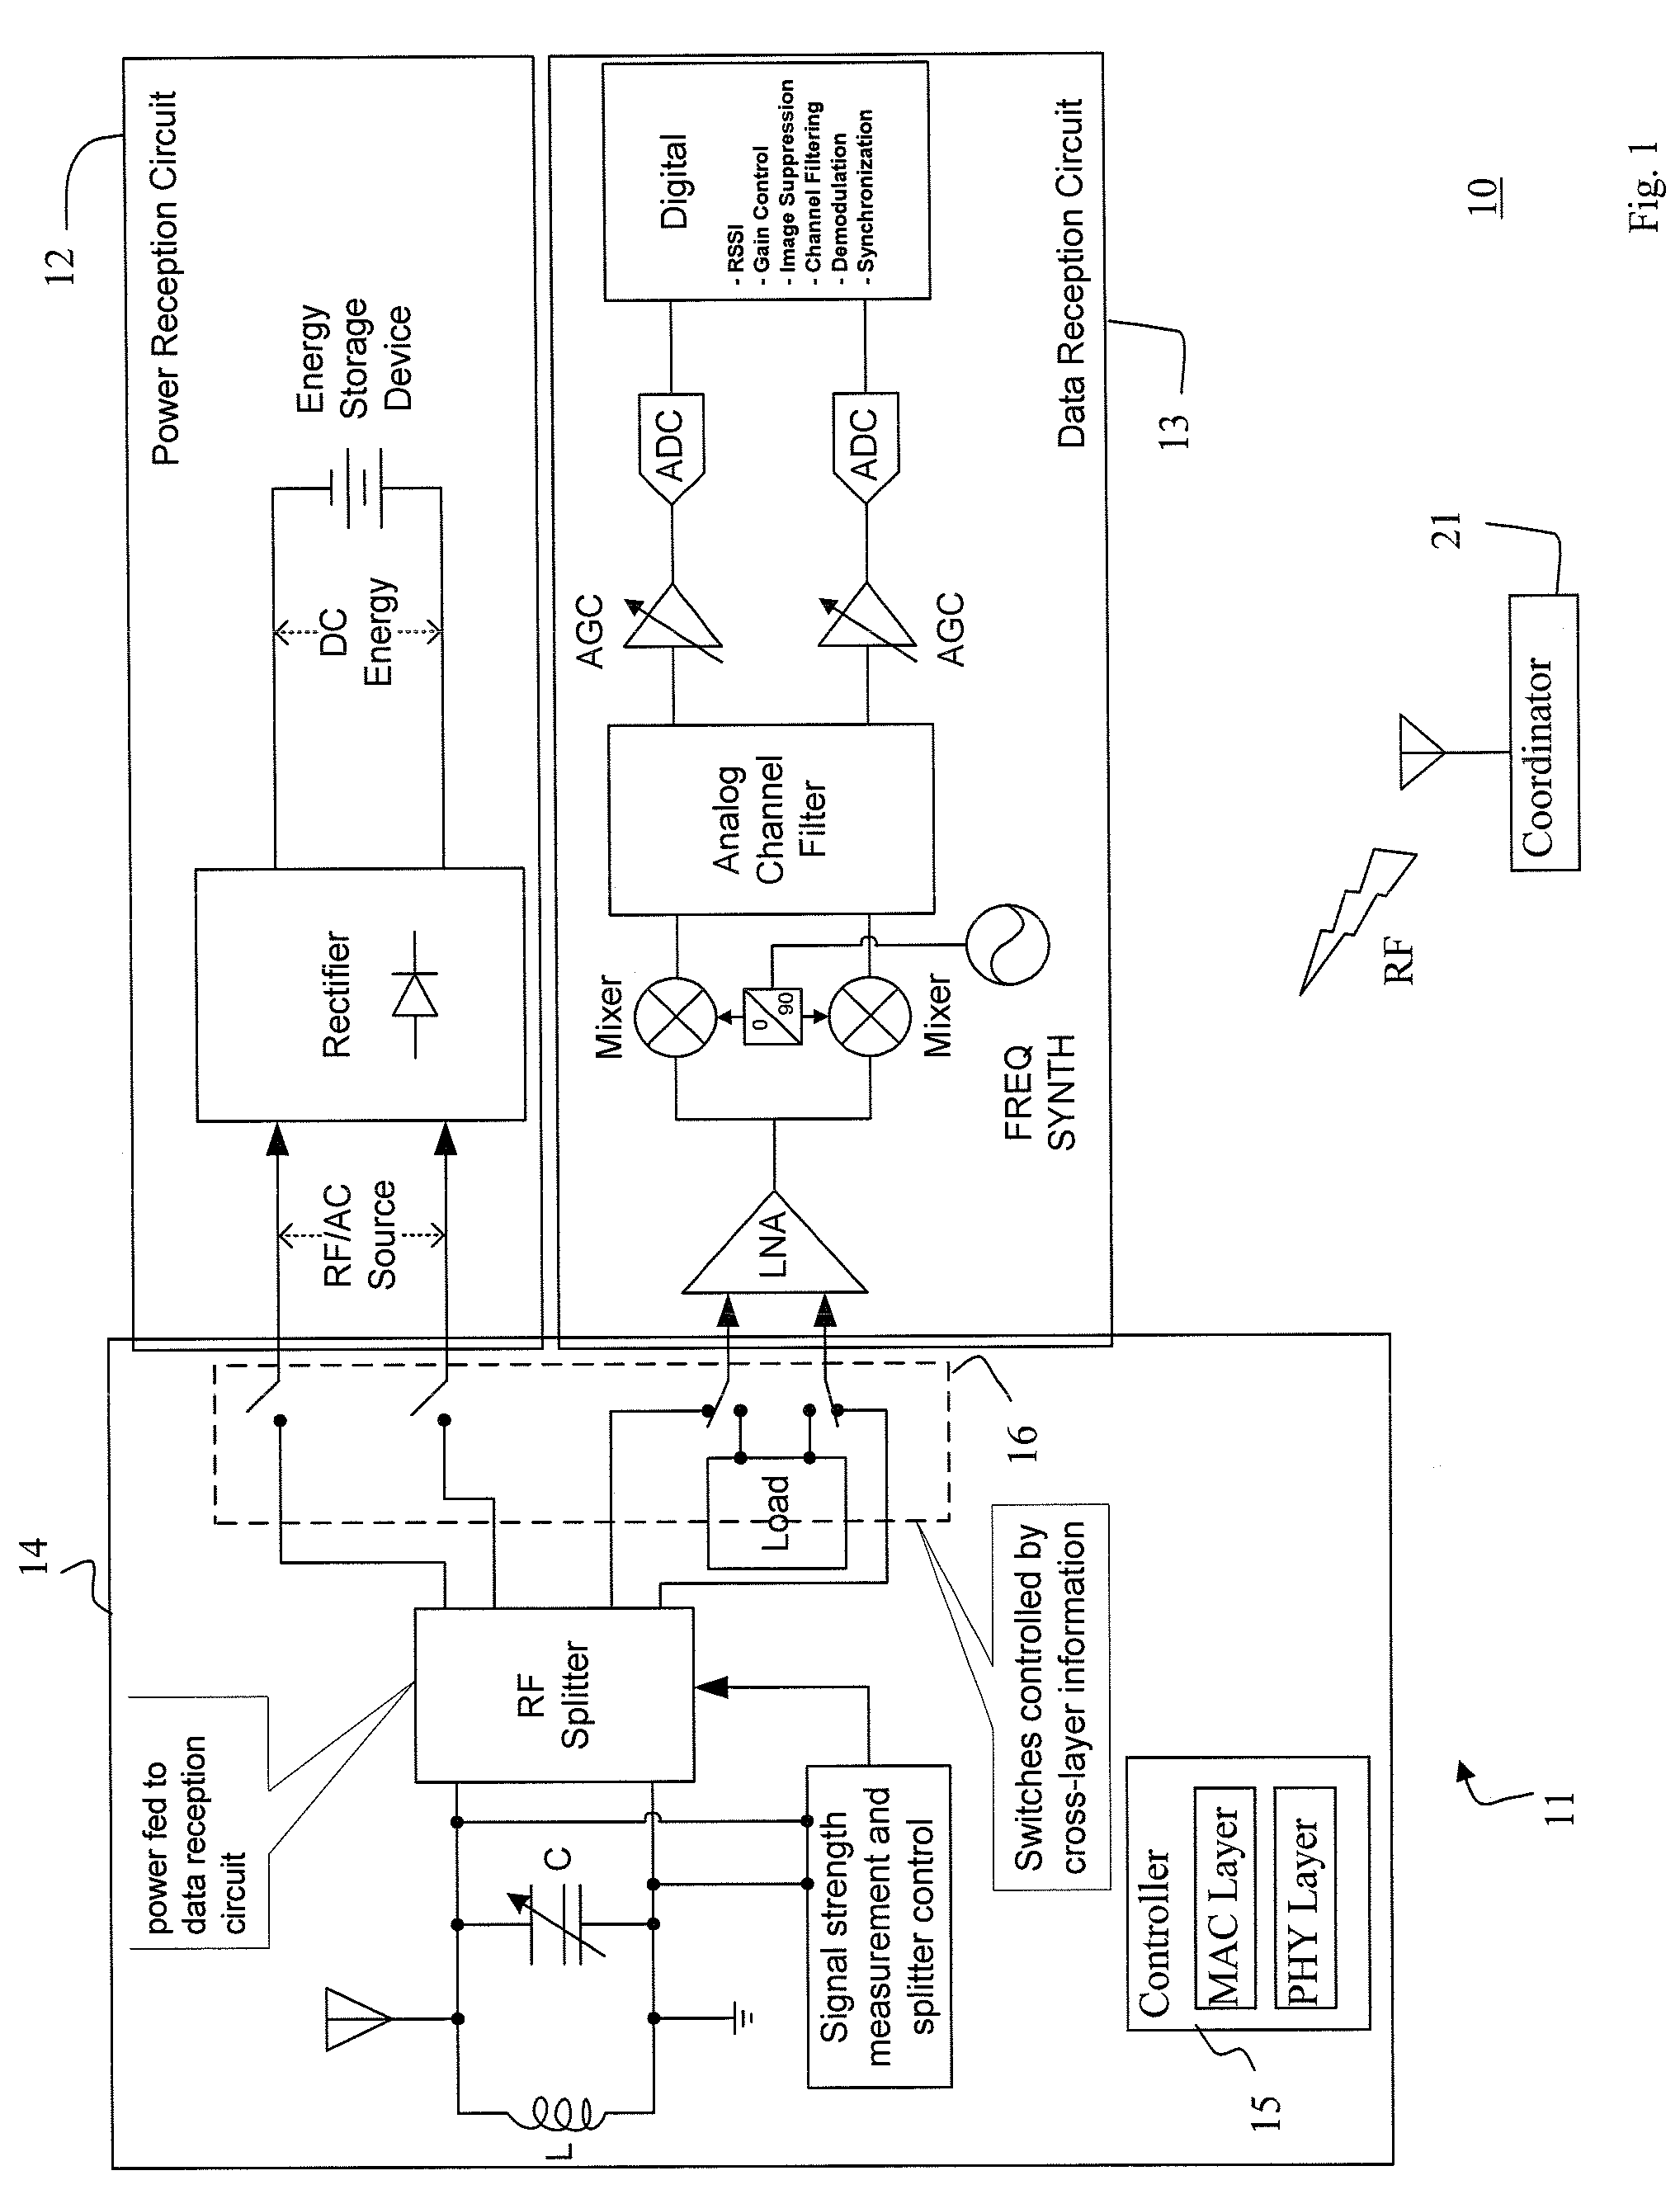 Method and system of radio frequency (RF) power transmission in a wireless network